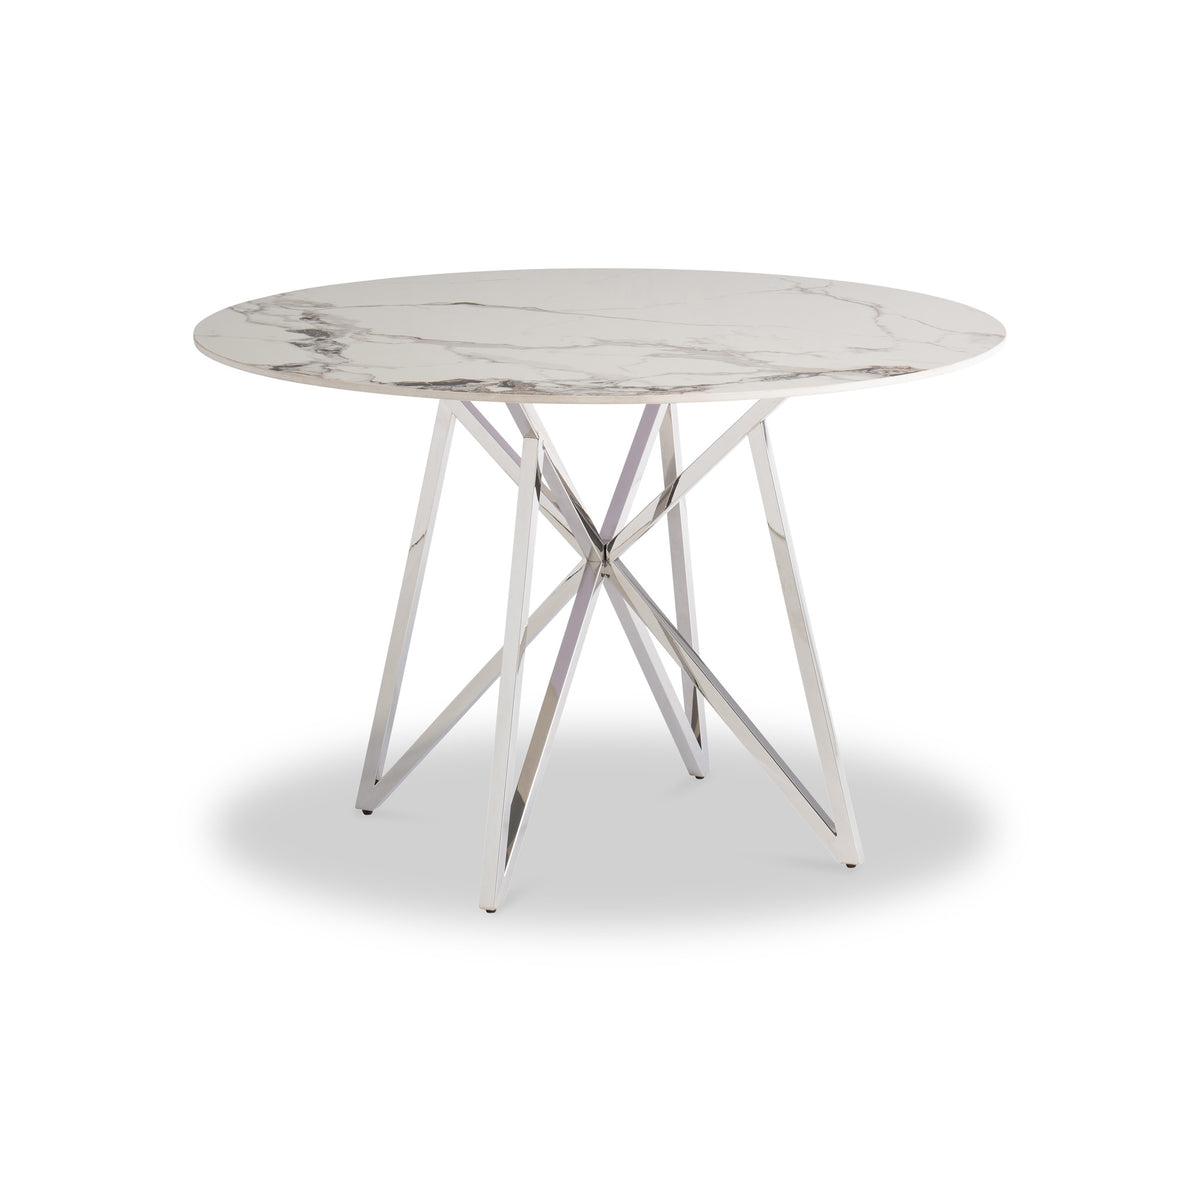 Carla White 1.2m Round Dining Table from Roseland Furniture